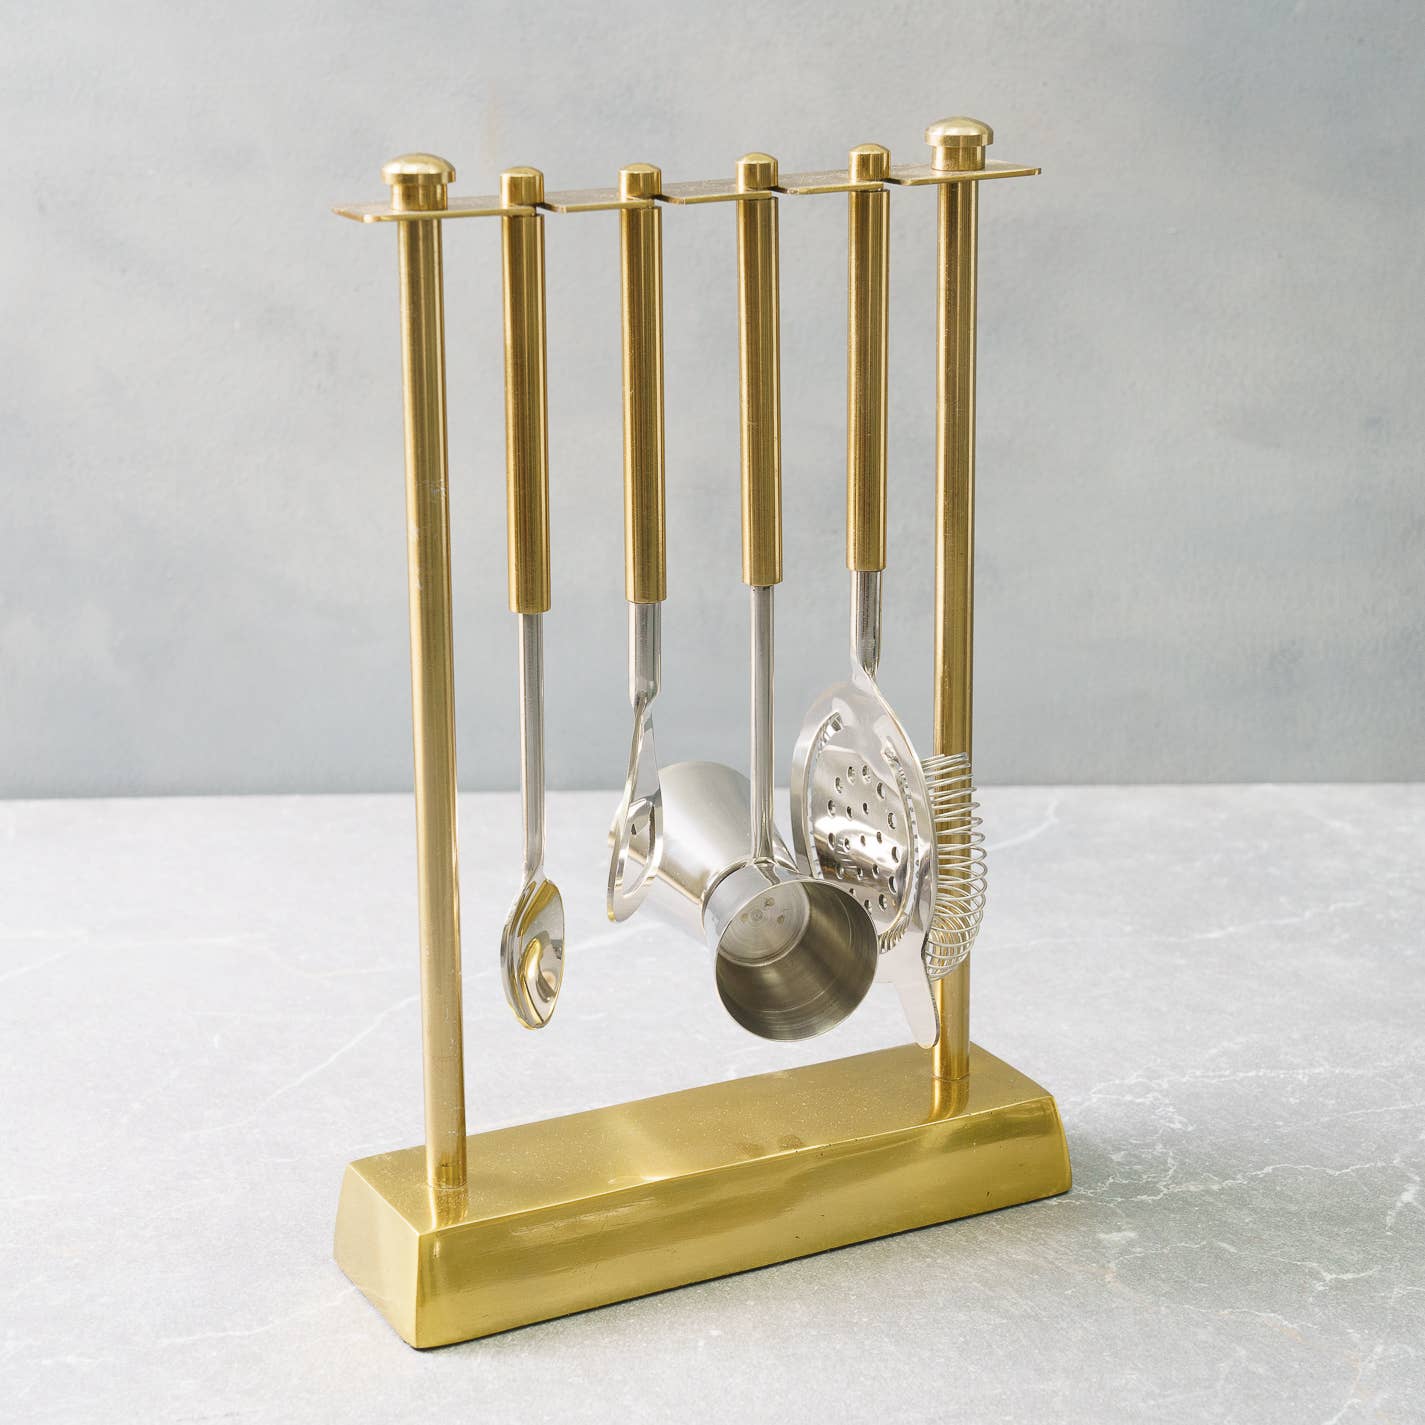 Gold Bartool Set of 4 with Stand